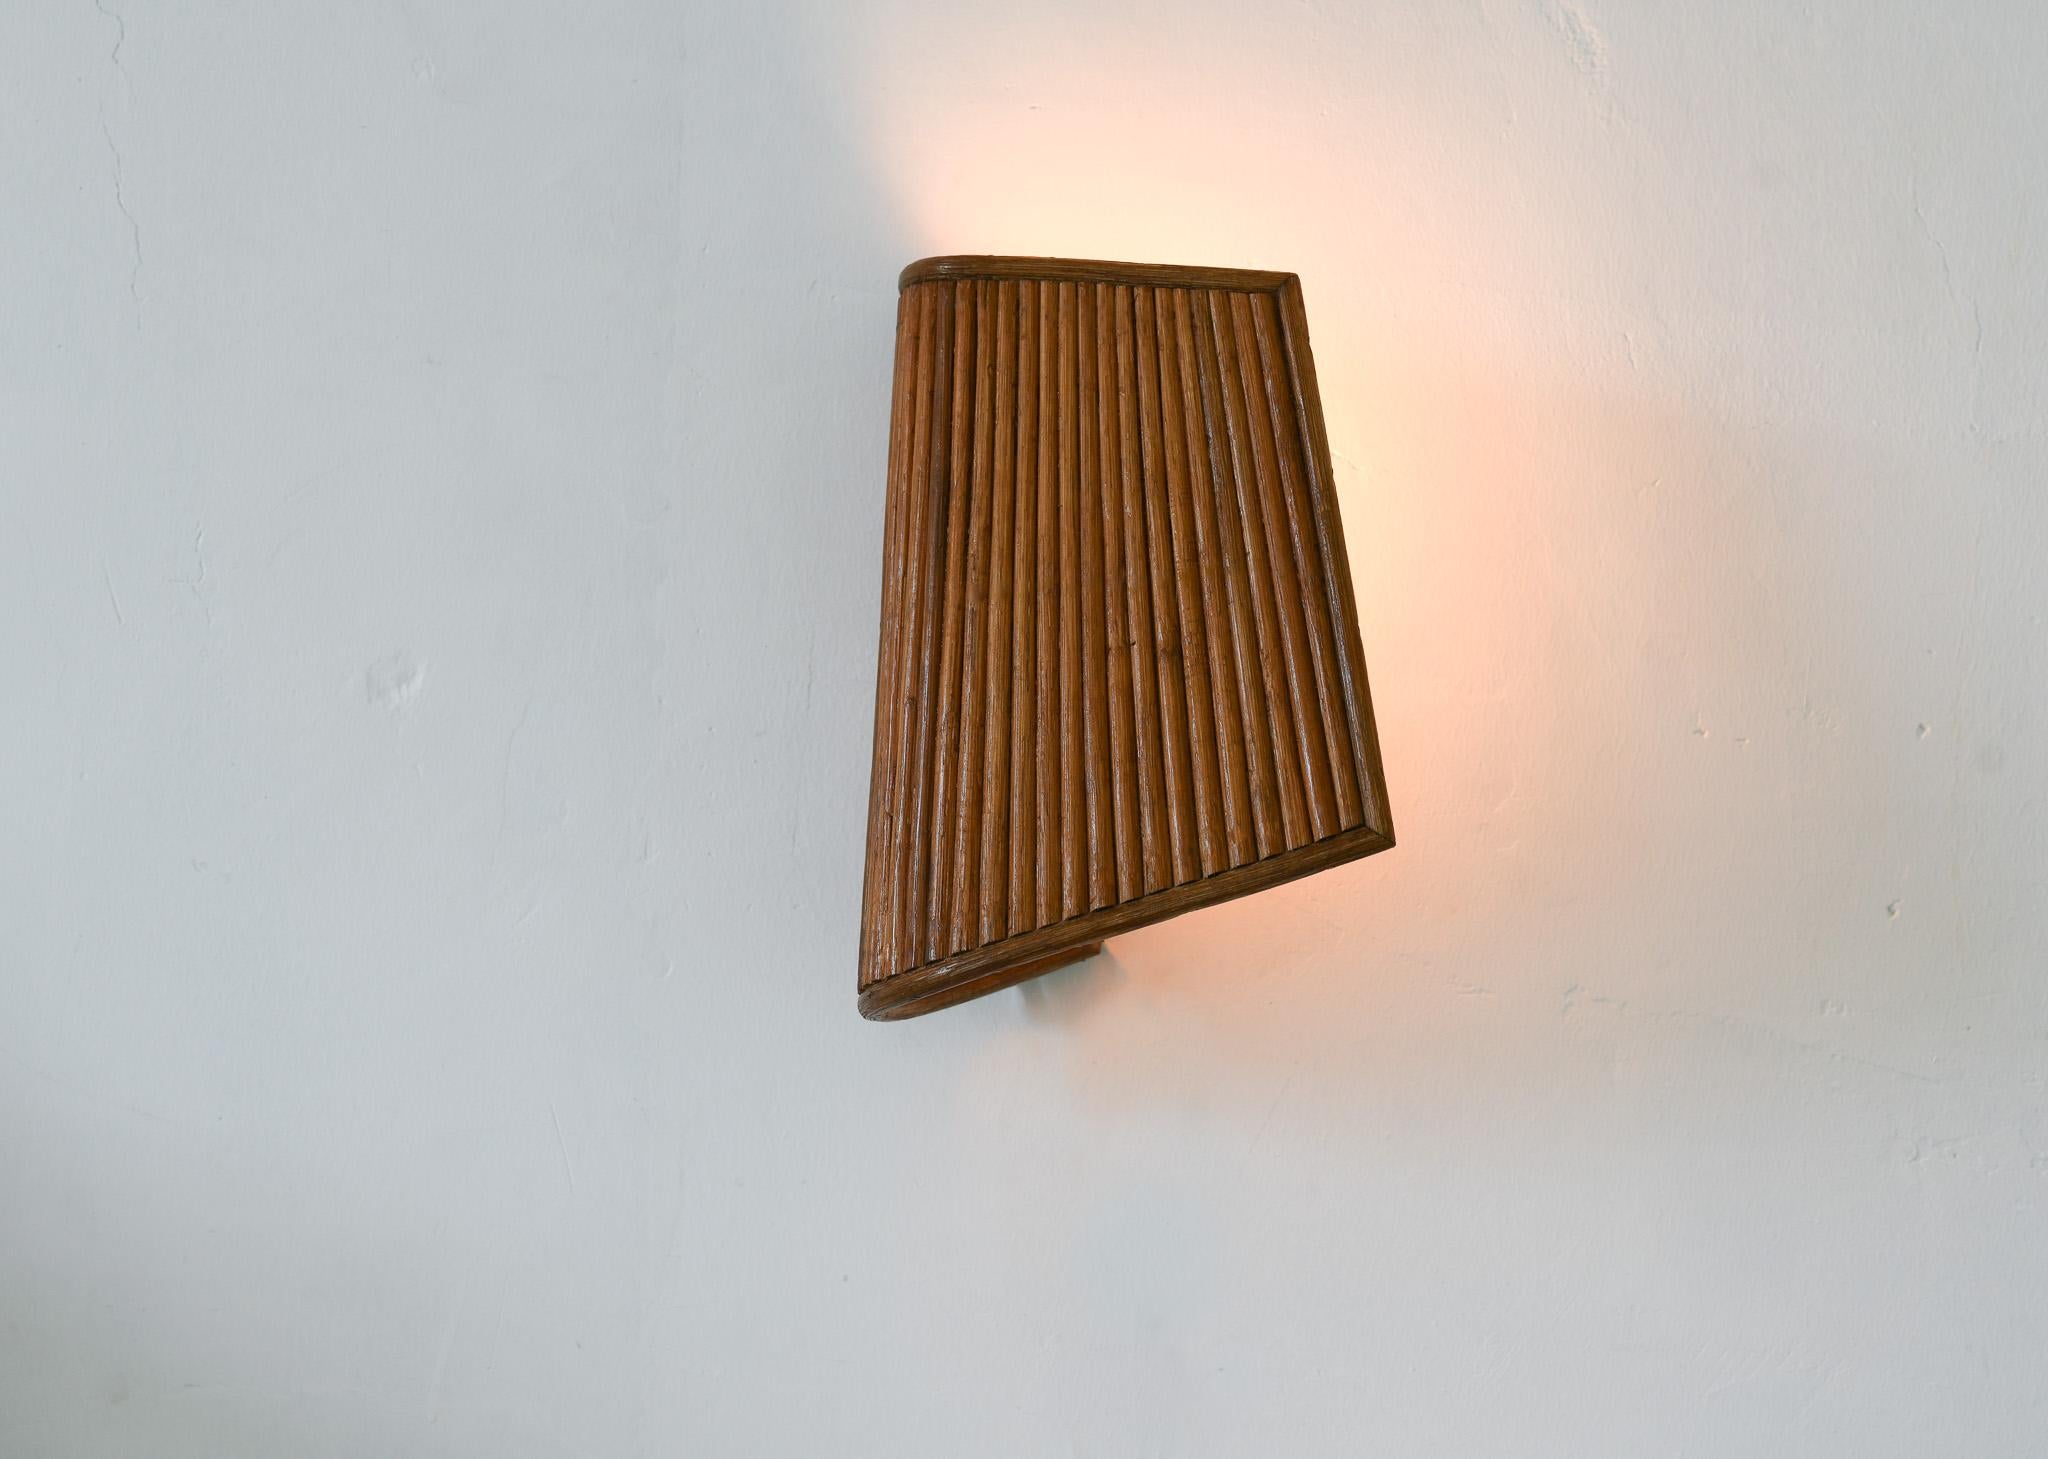 This wall mounted lamp combines modern functionality with a sculptural rattan design inspired by Italian mid-century art. The intricate rattan details and a pattern of vertical lines gives the shade an elegant vibe and unique texture. Crafted with